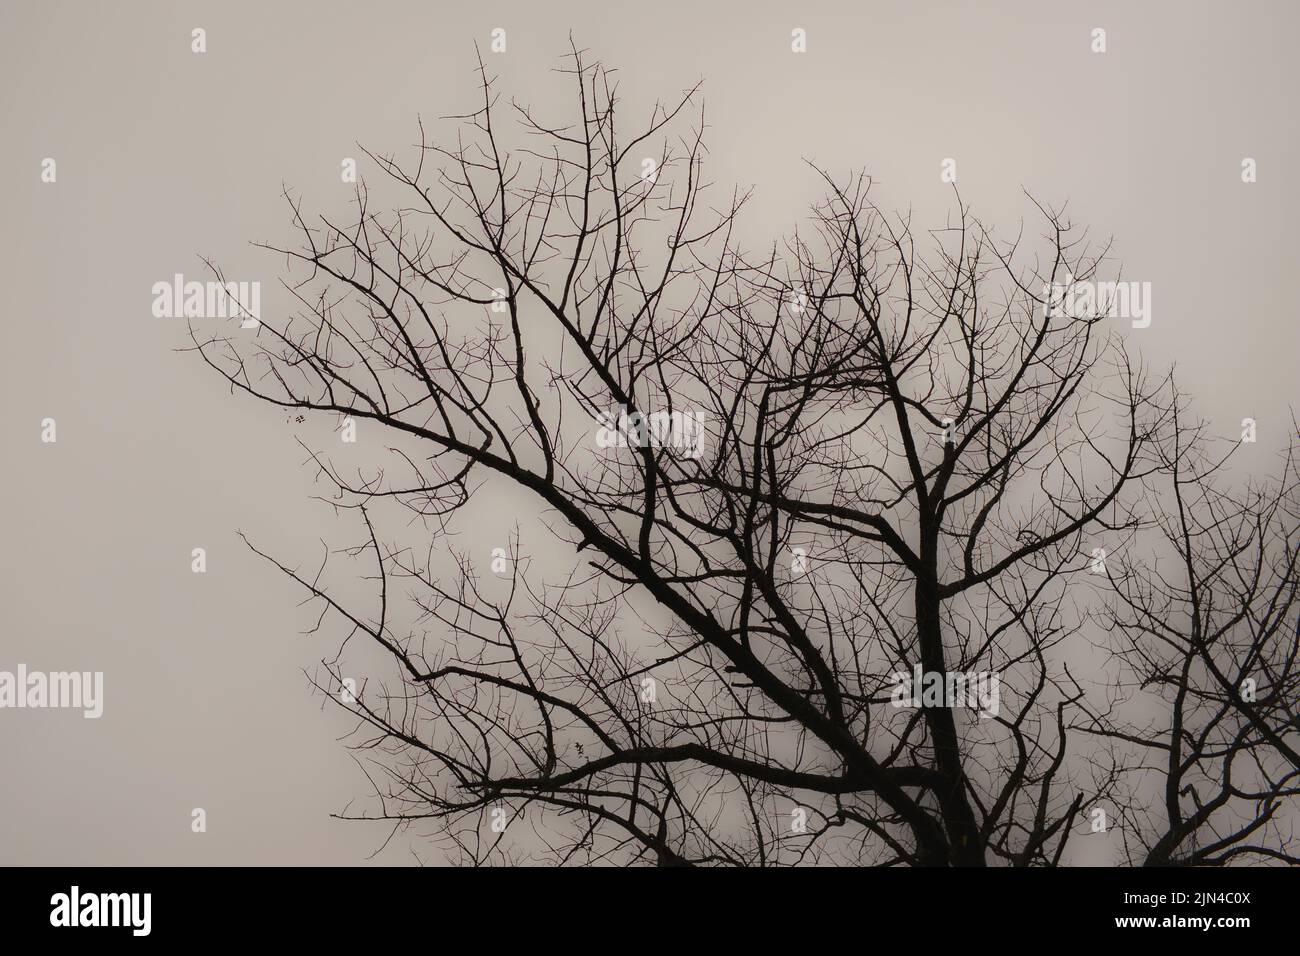 Silhouette of Bare Tree Branches against Cloudy Sky Stock Photo